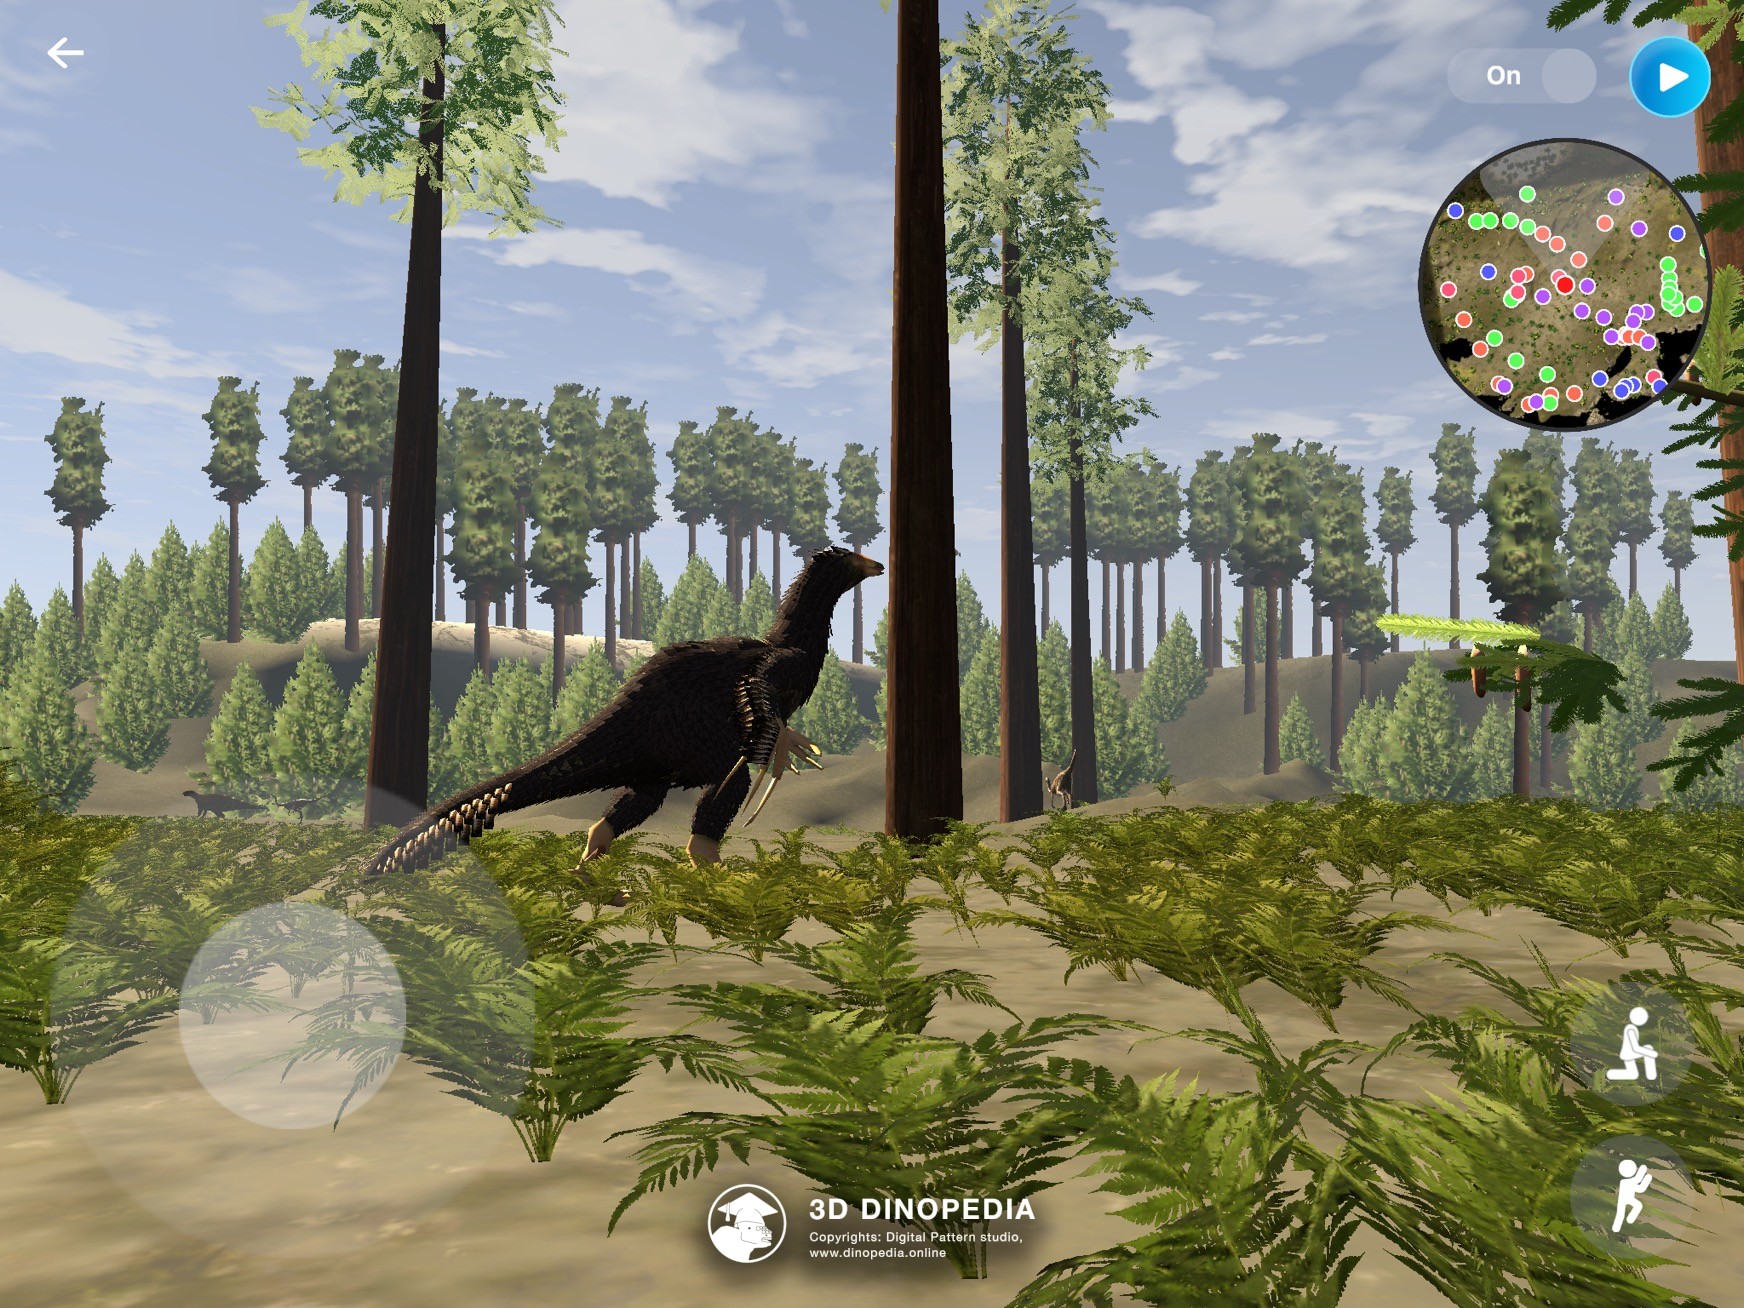 3D Dinopedia Discover what's new in the 3D Dinopedia app, version 4.13